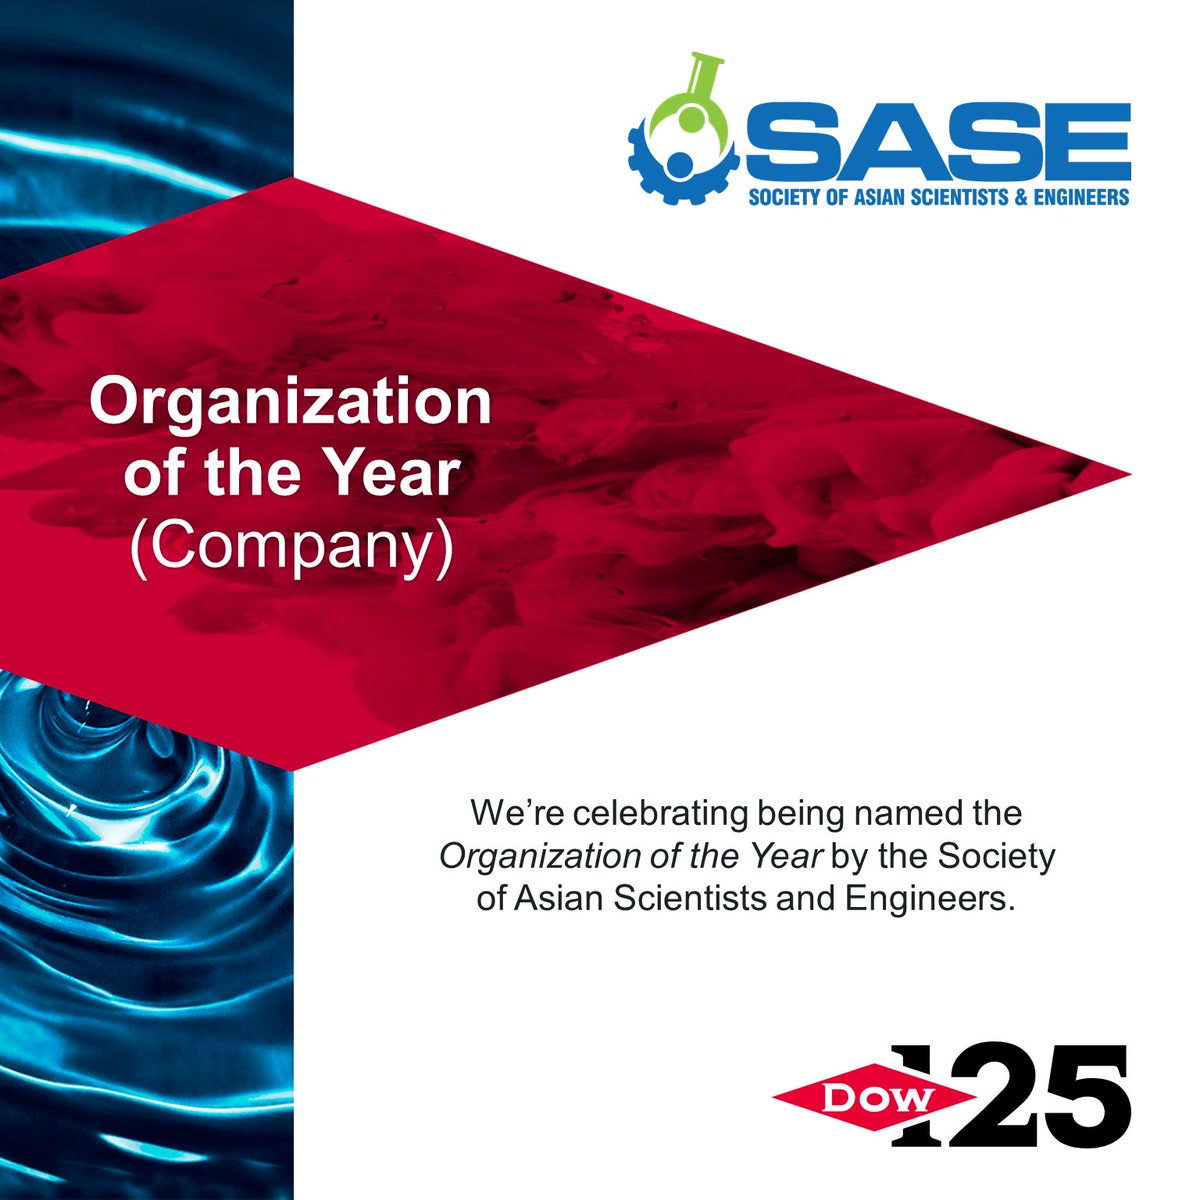 The Society of Asian Scientists and Engineers recognizes Dow Inc. as Organization of the Year.